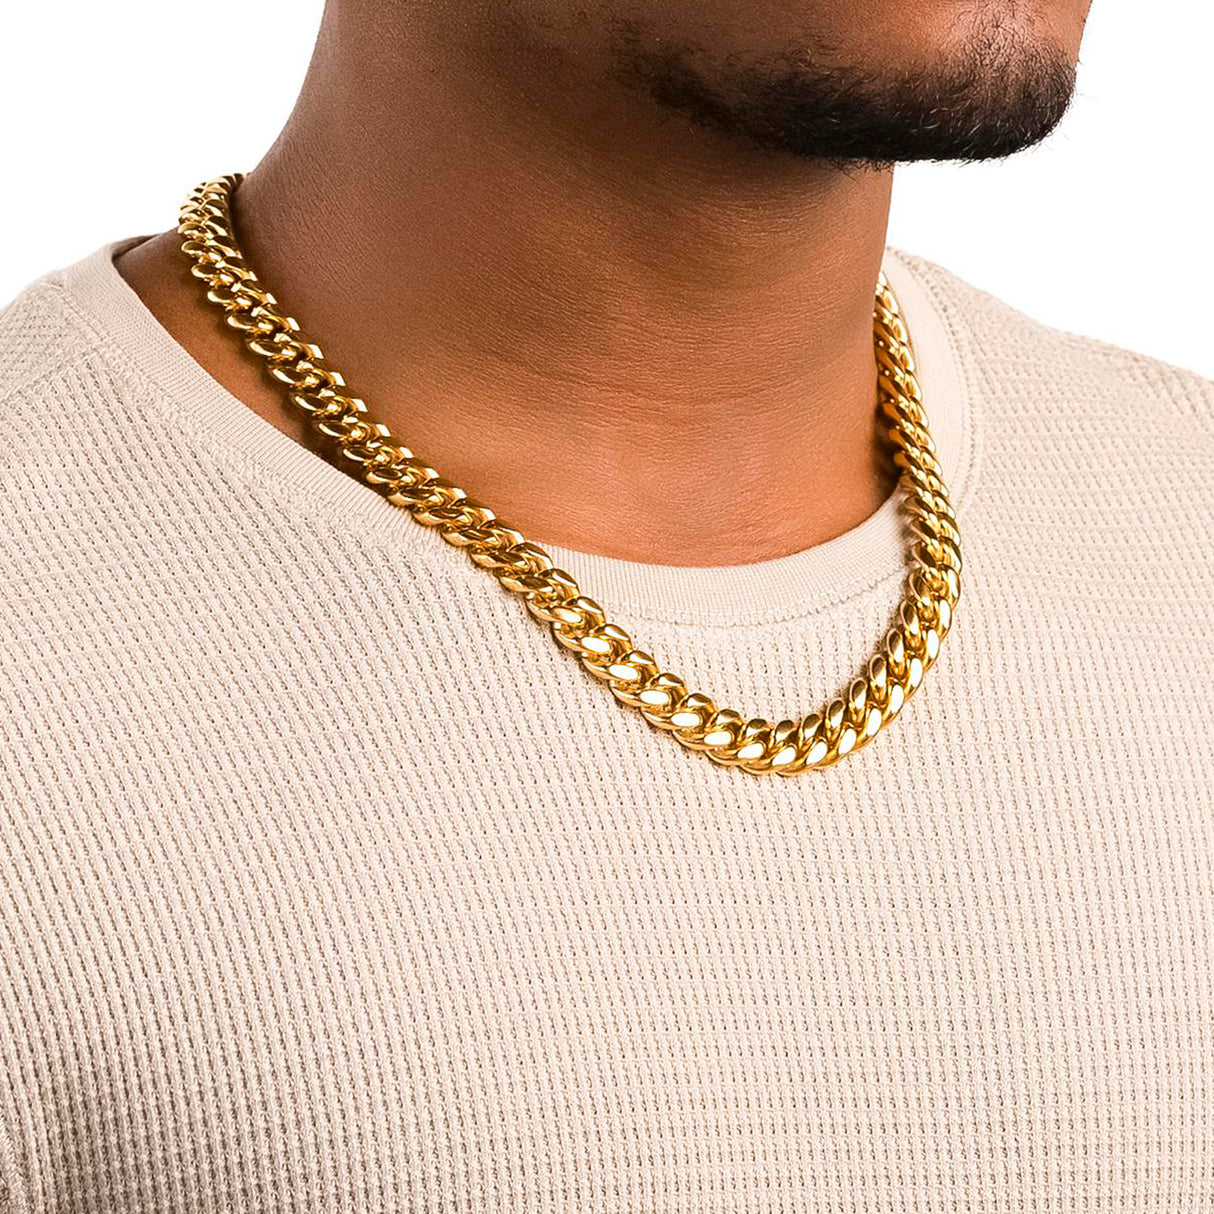 _the-gold-gods-mens-jewelry-18k-gold-plated-miami-cuban-link-necklace-12mm-22inch